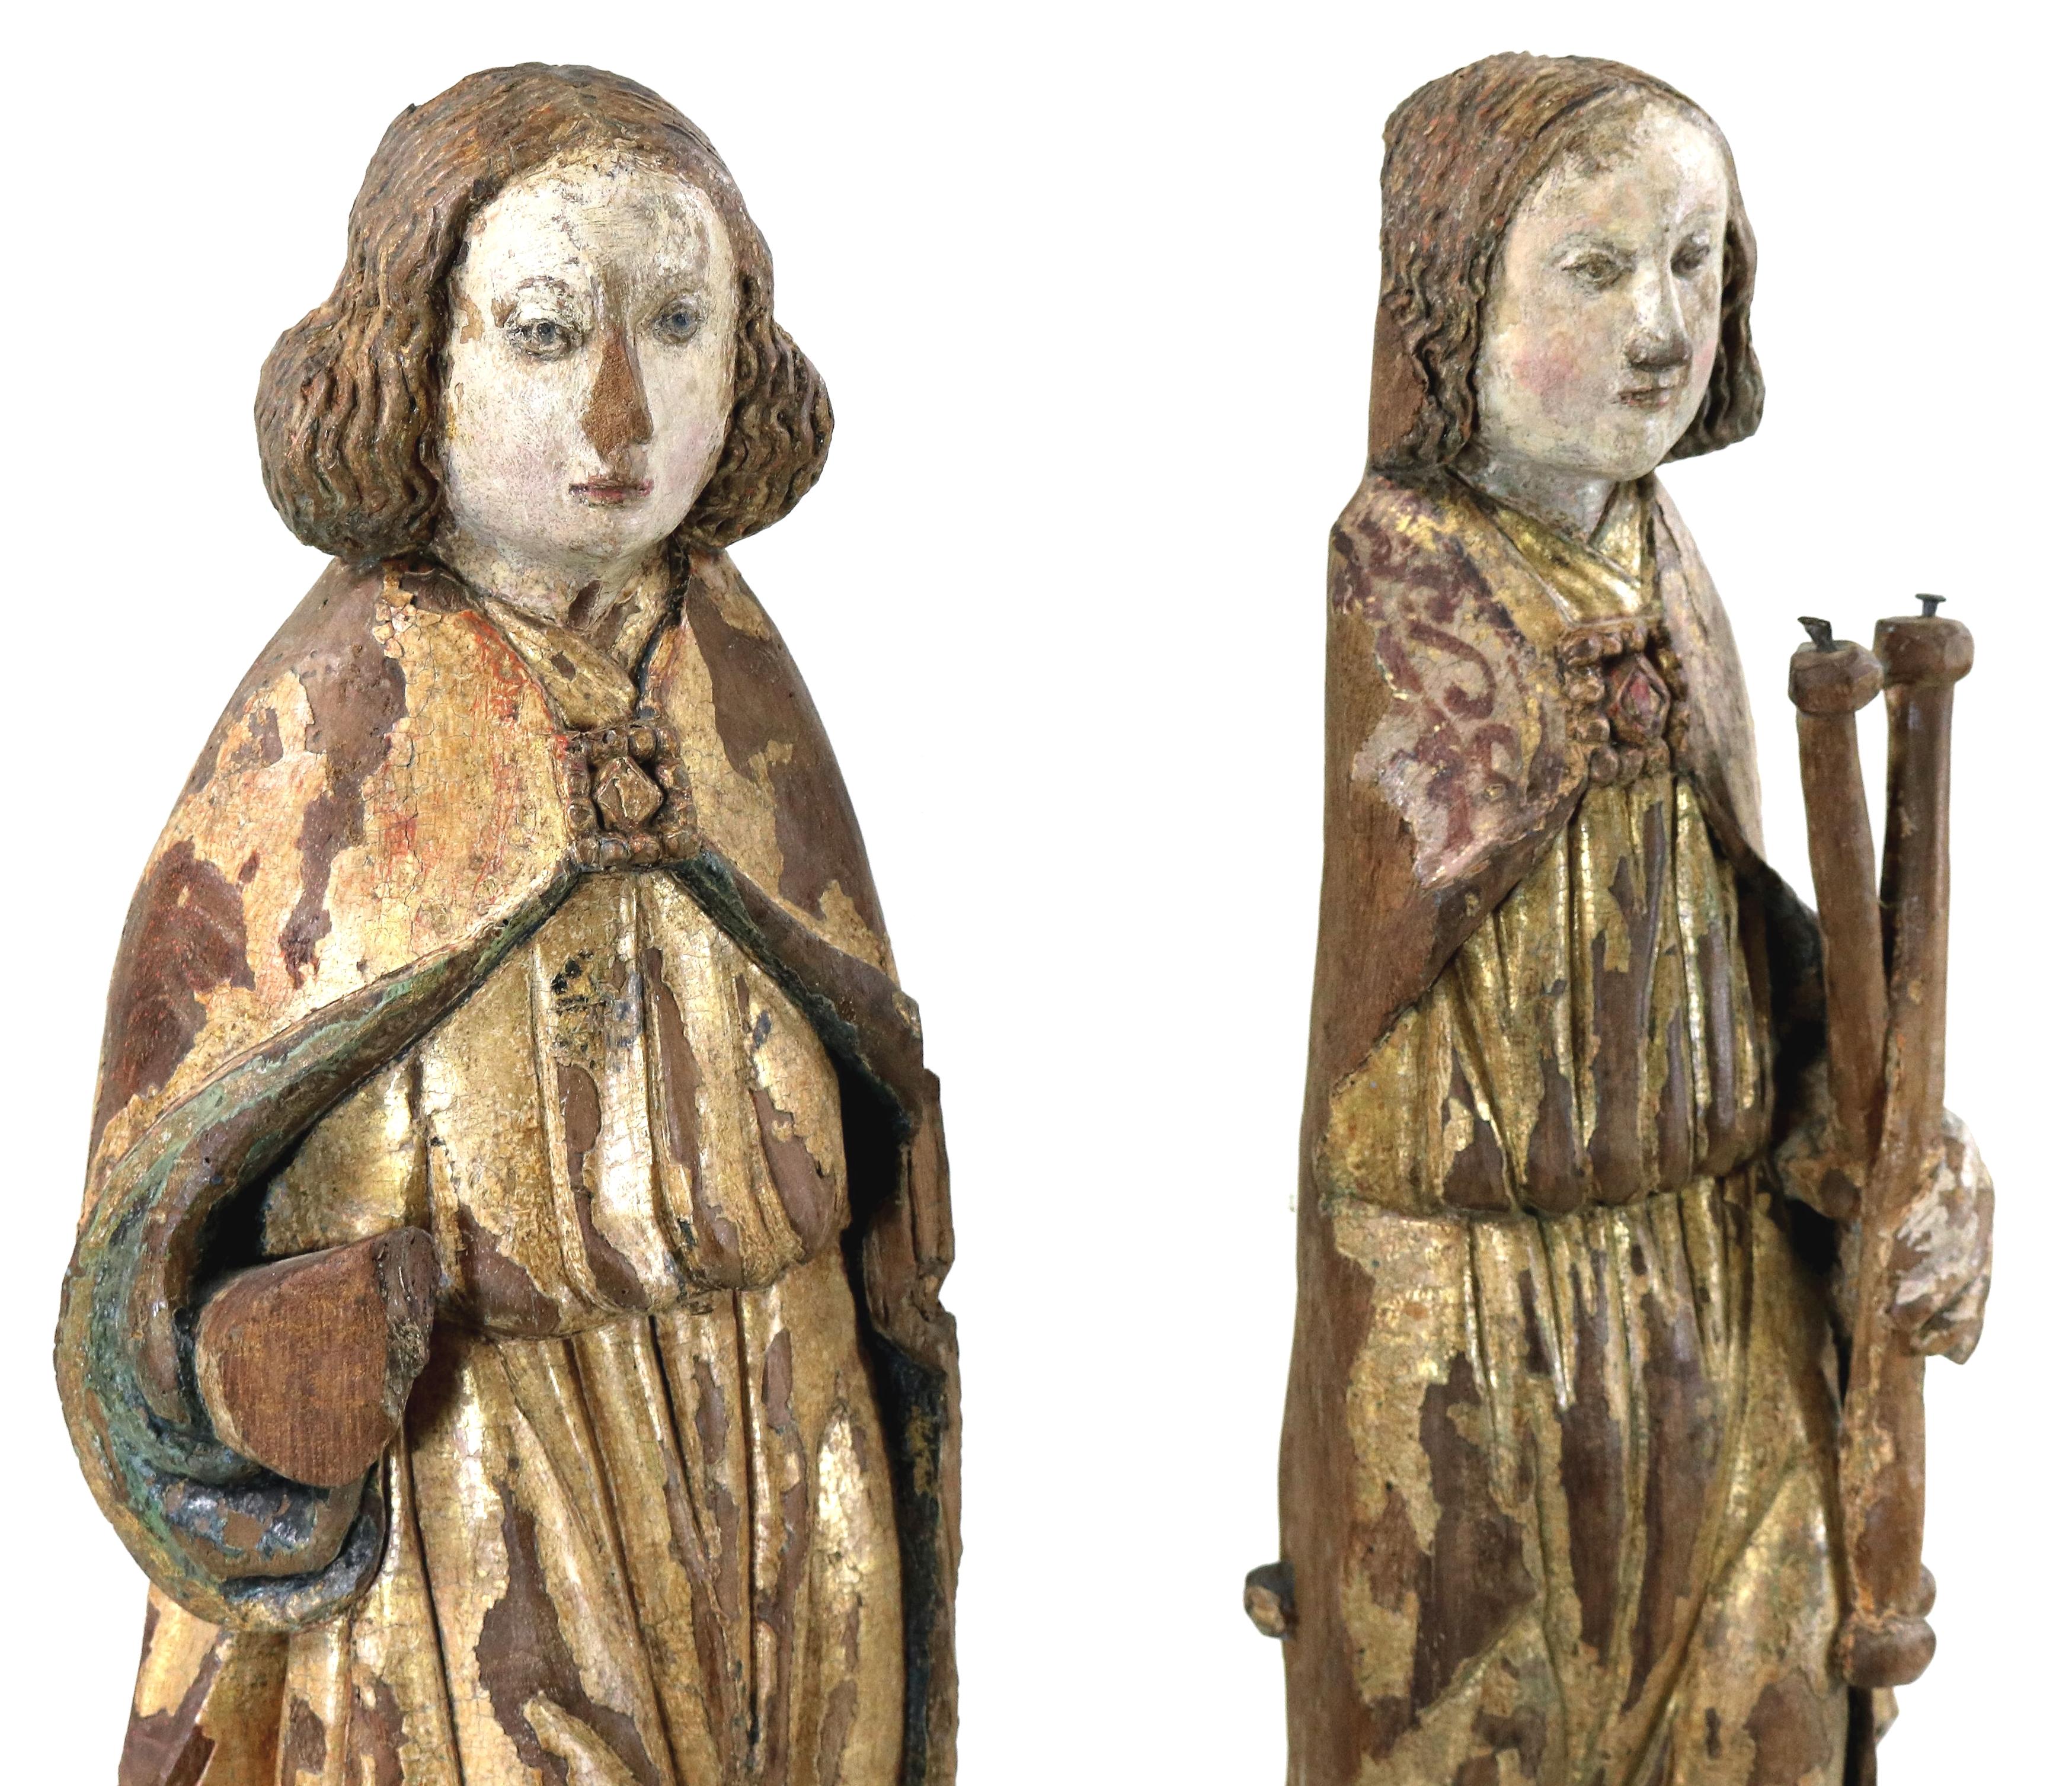 Pair of gilt and polychrome wood angels circa 1500 - Renaissance Sculpture by Unknown